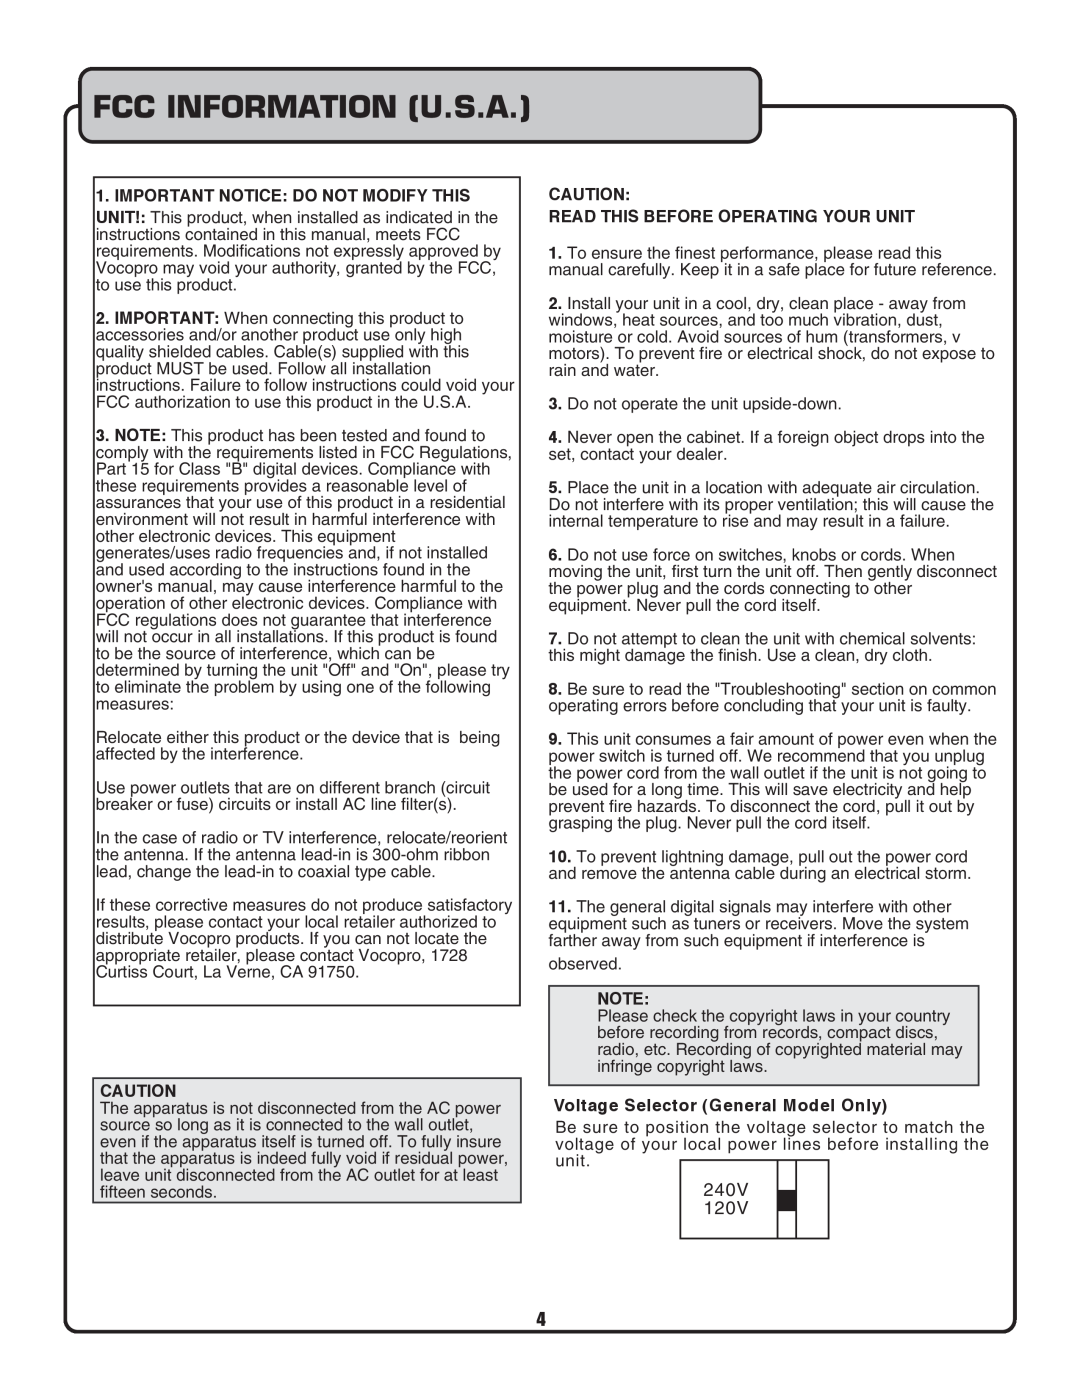 VocoPro CDG-9000 Fcc Information U.S.A, Important Notice Do Not Modify This, Read This Before Operating Your Unit 